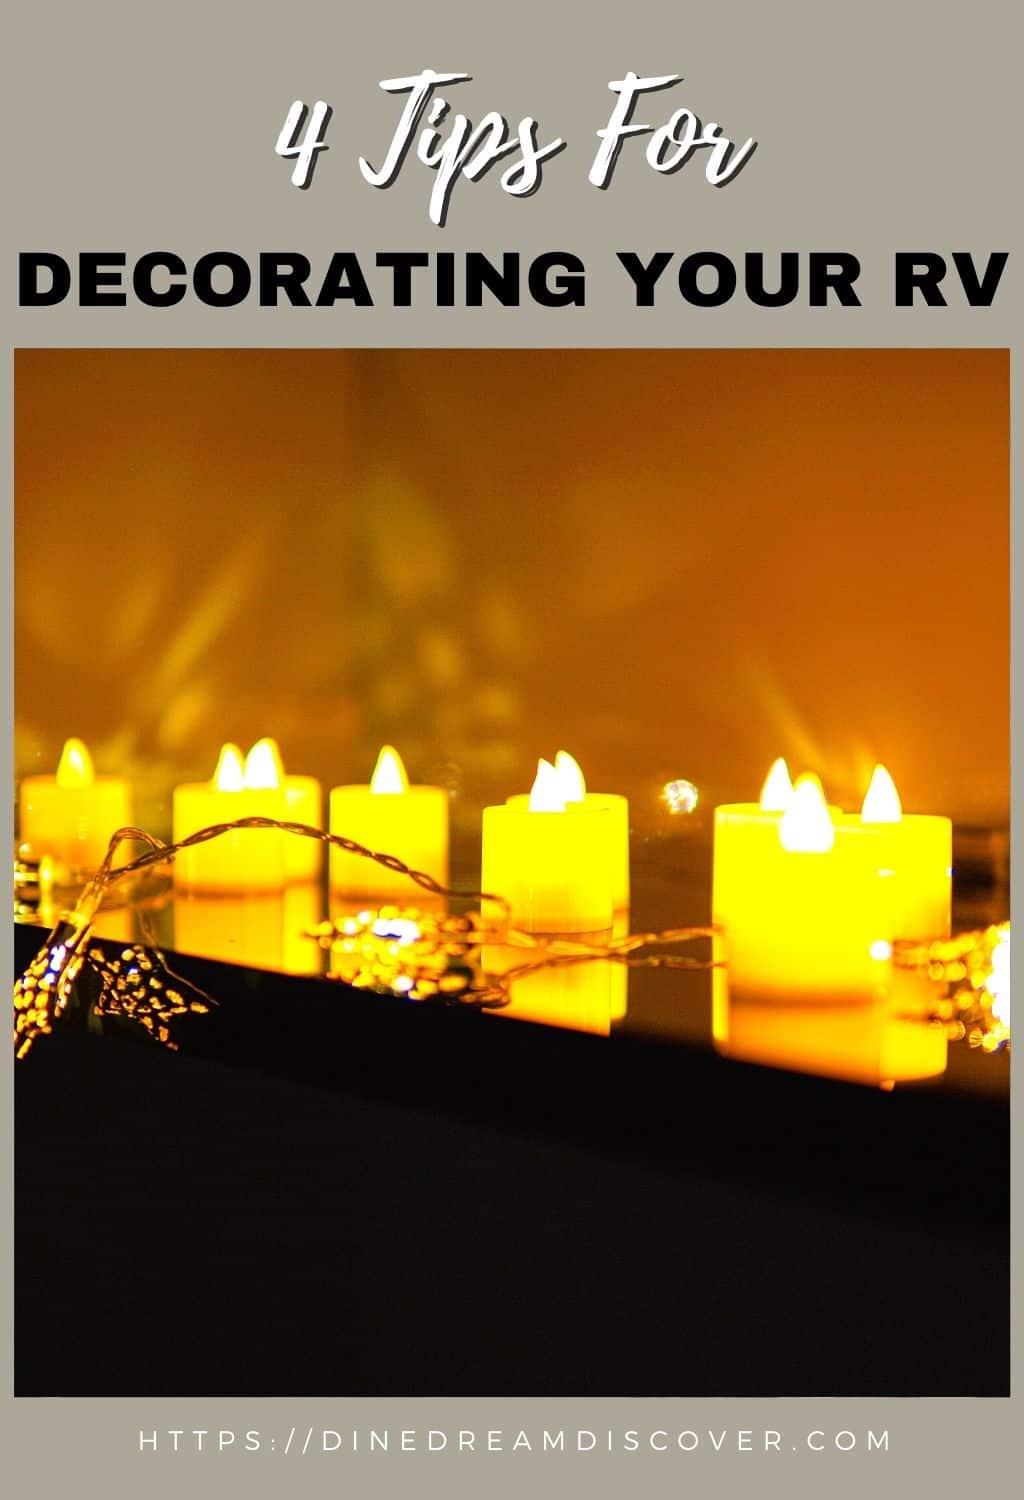 Decorating Your RV